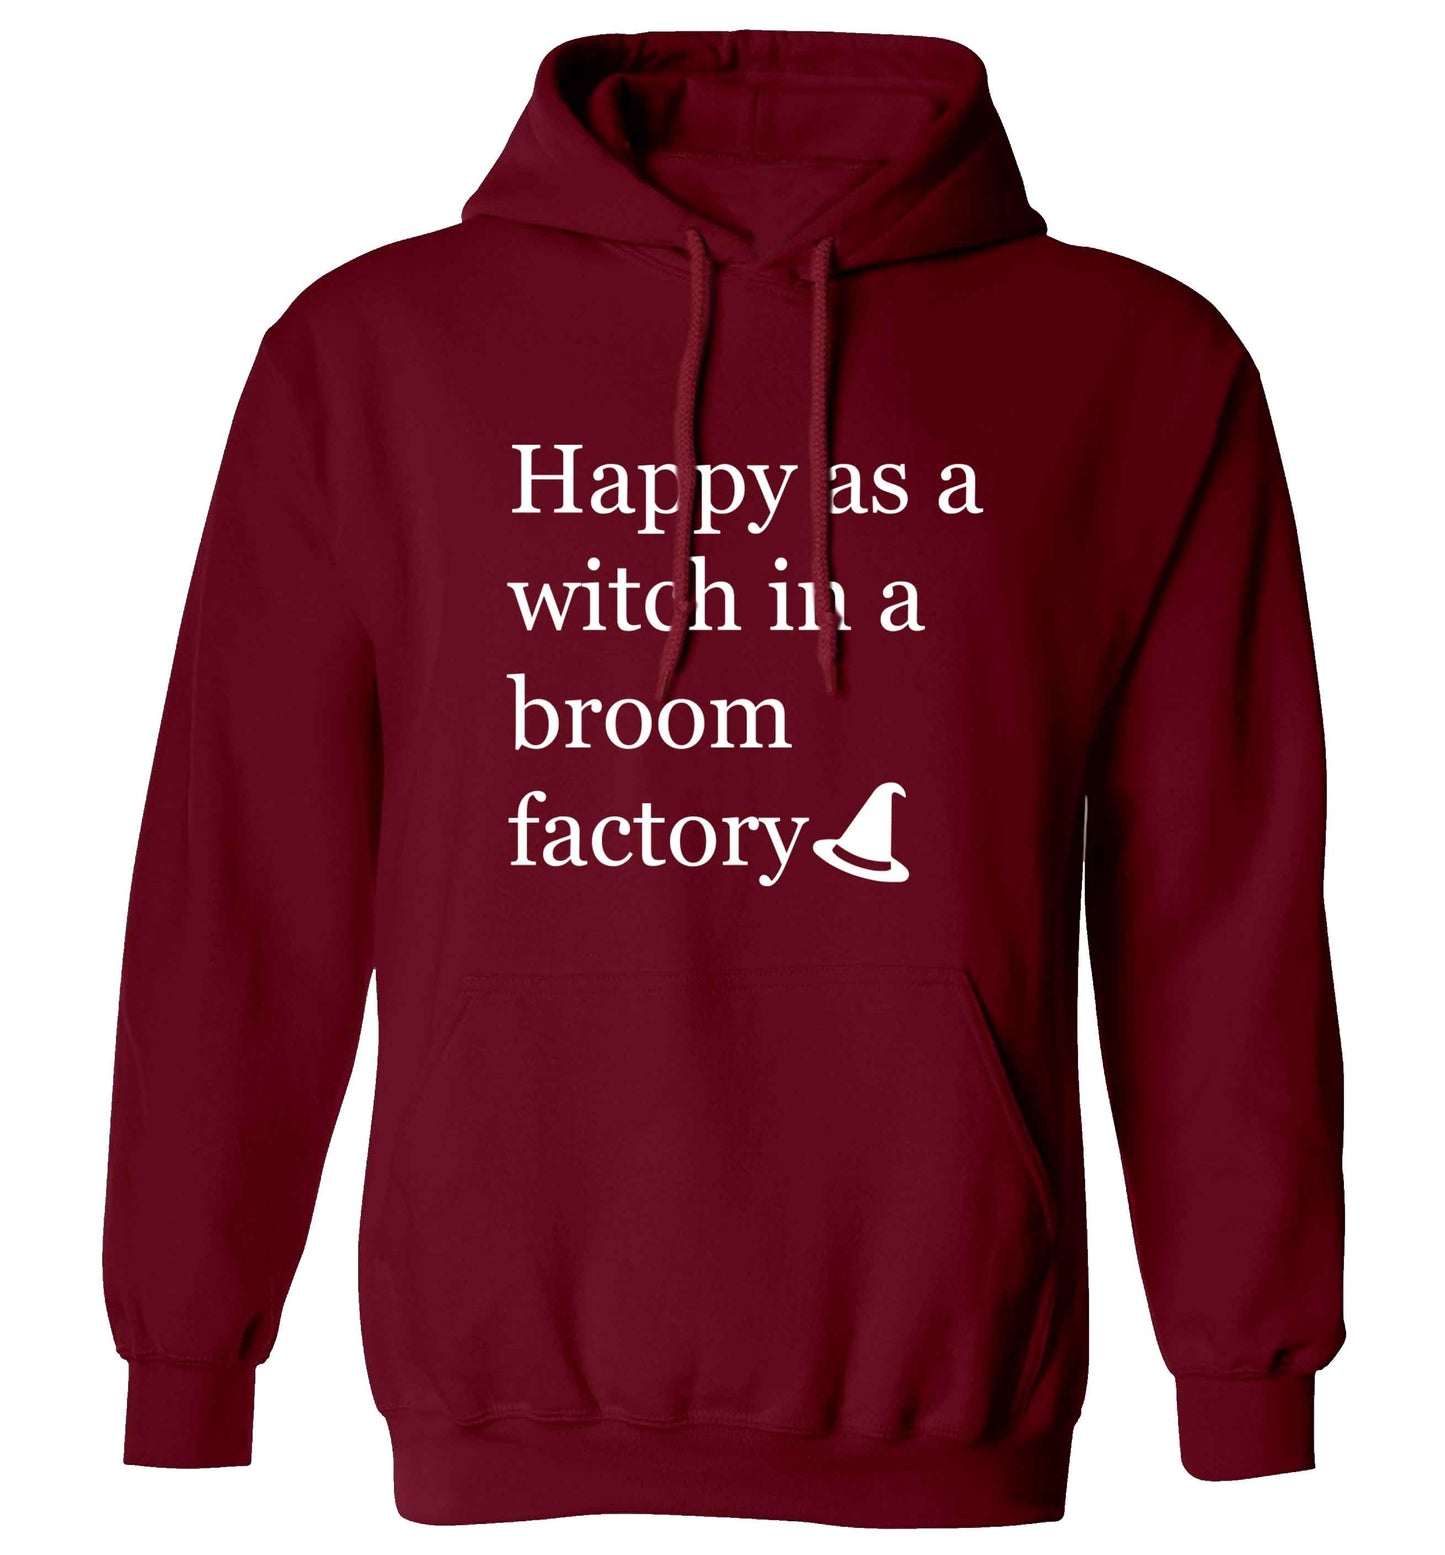 Happy as a witch in a broom factory adults unisex maroon hoodie 2XL